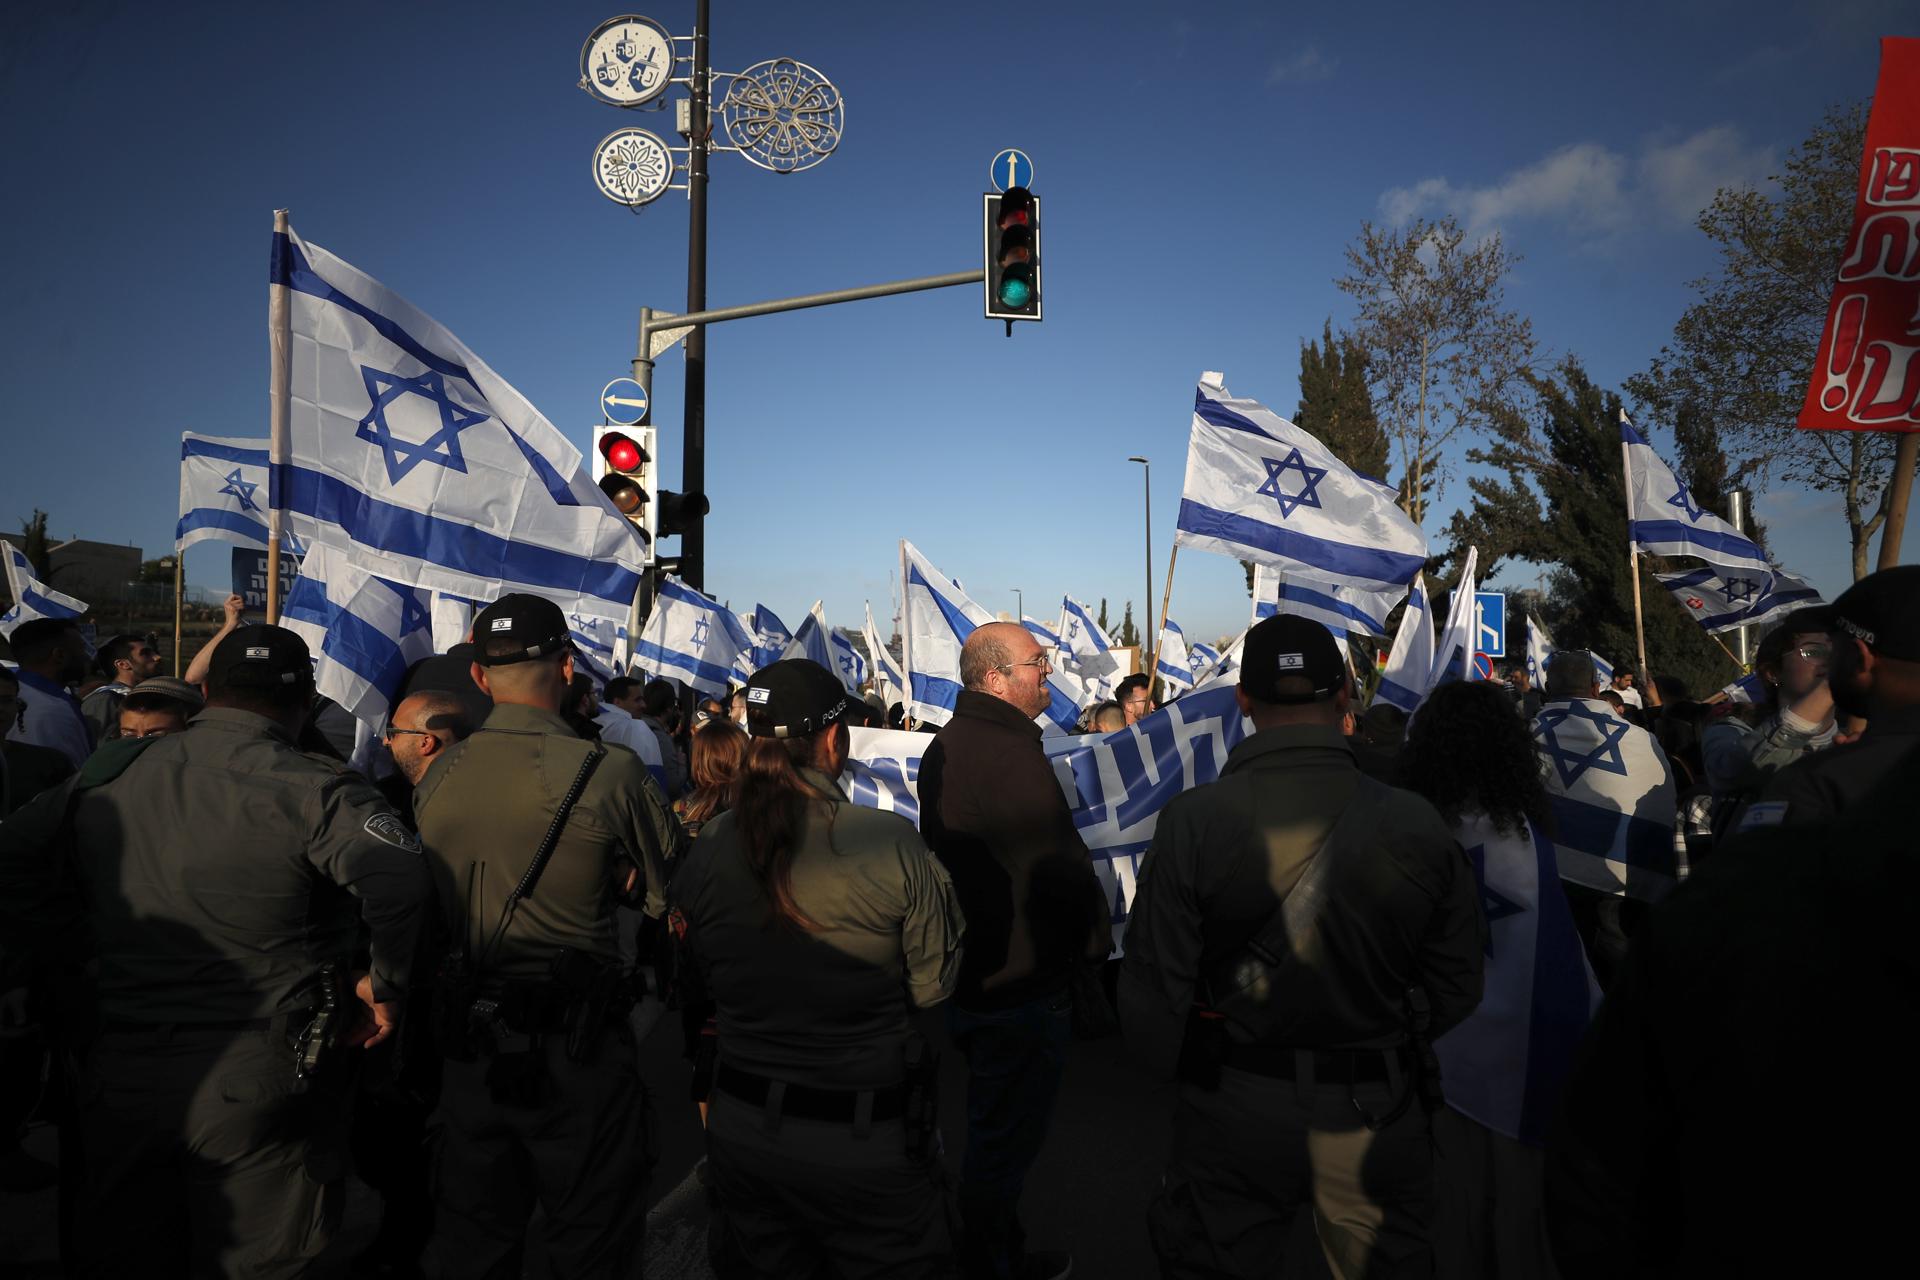 Israeli police try to separate Israeli Right-wing government supporters and anti-government protesters, as they gather outside the Knesset (the Parliament), ahead of mass protests in Jerusalem, Israel, 27 March 2023. EFE/EPA/ATEF SAFADI